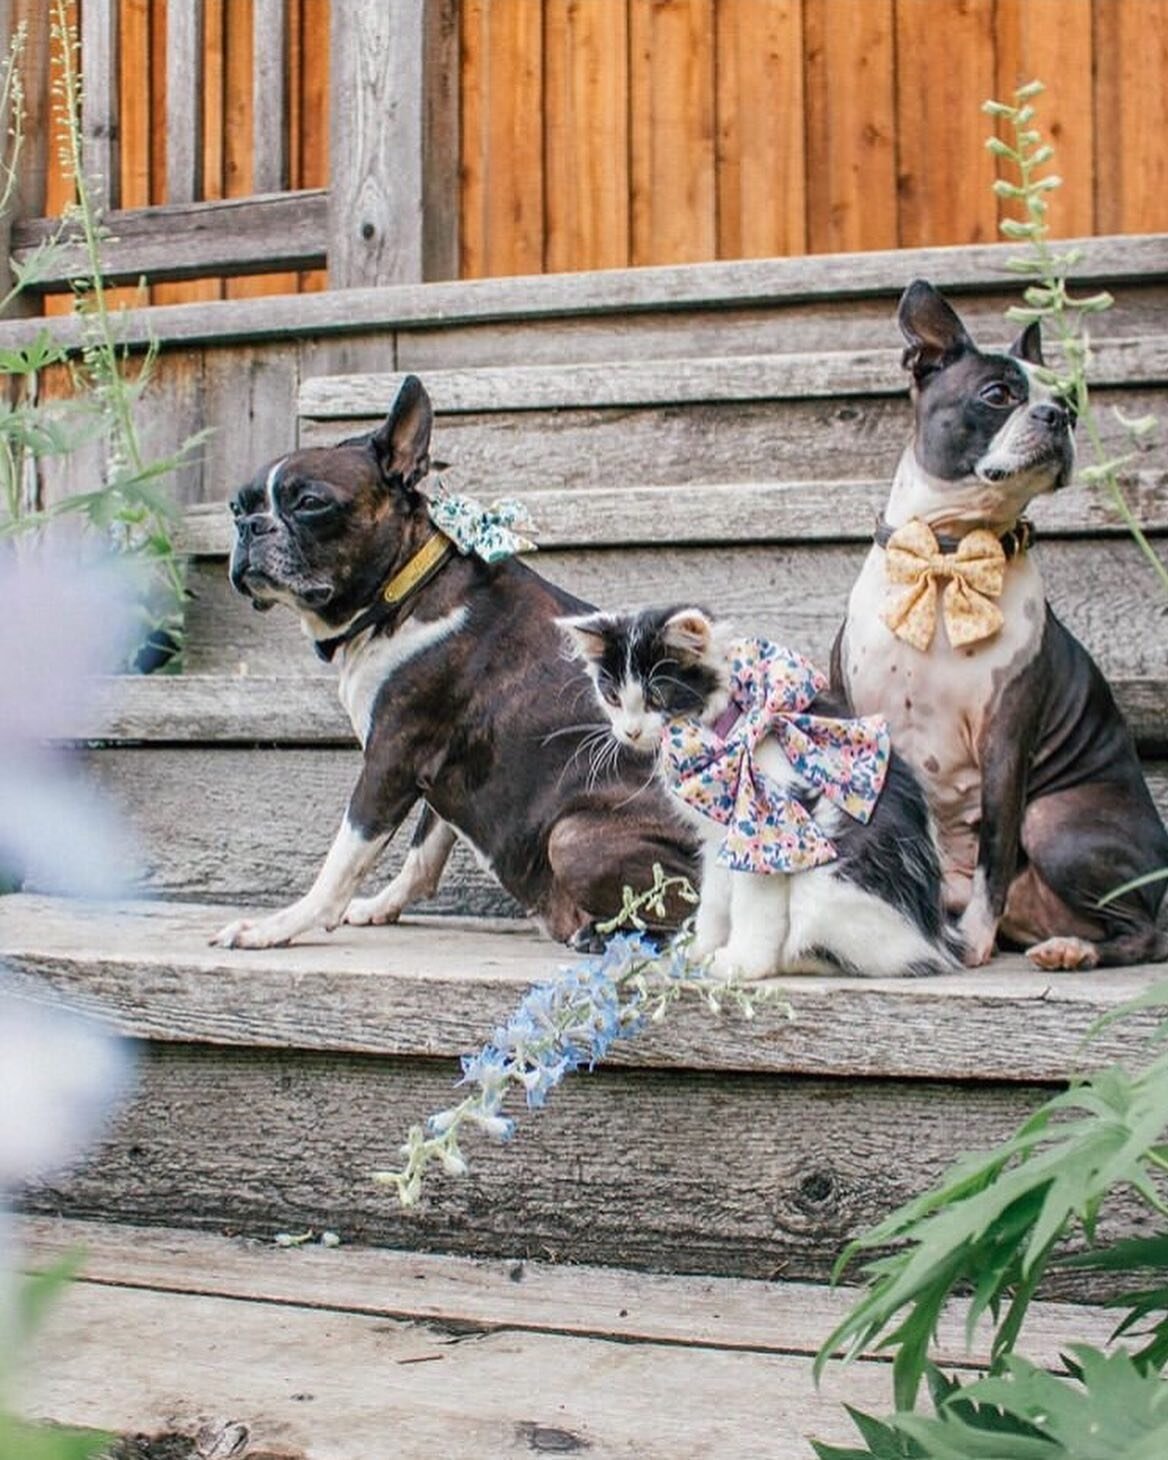 @thetulepps really went all out to outfit their pets! Look who ended up with the biggest bow 🙈

Thanks so much for sharing your shots with us!